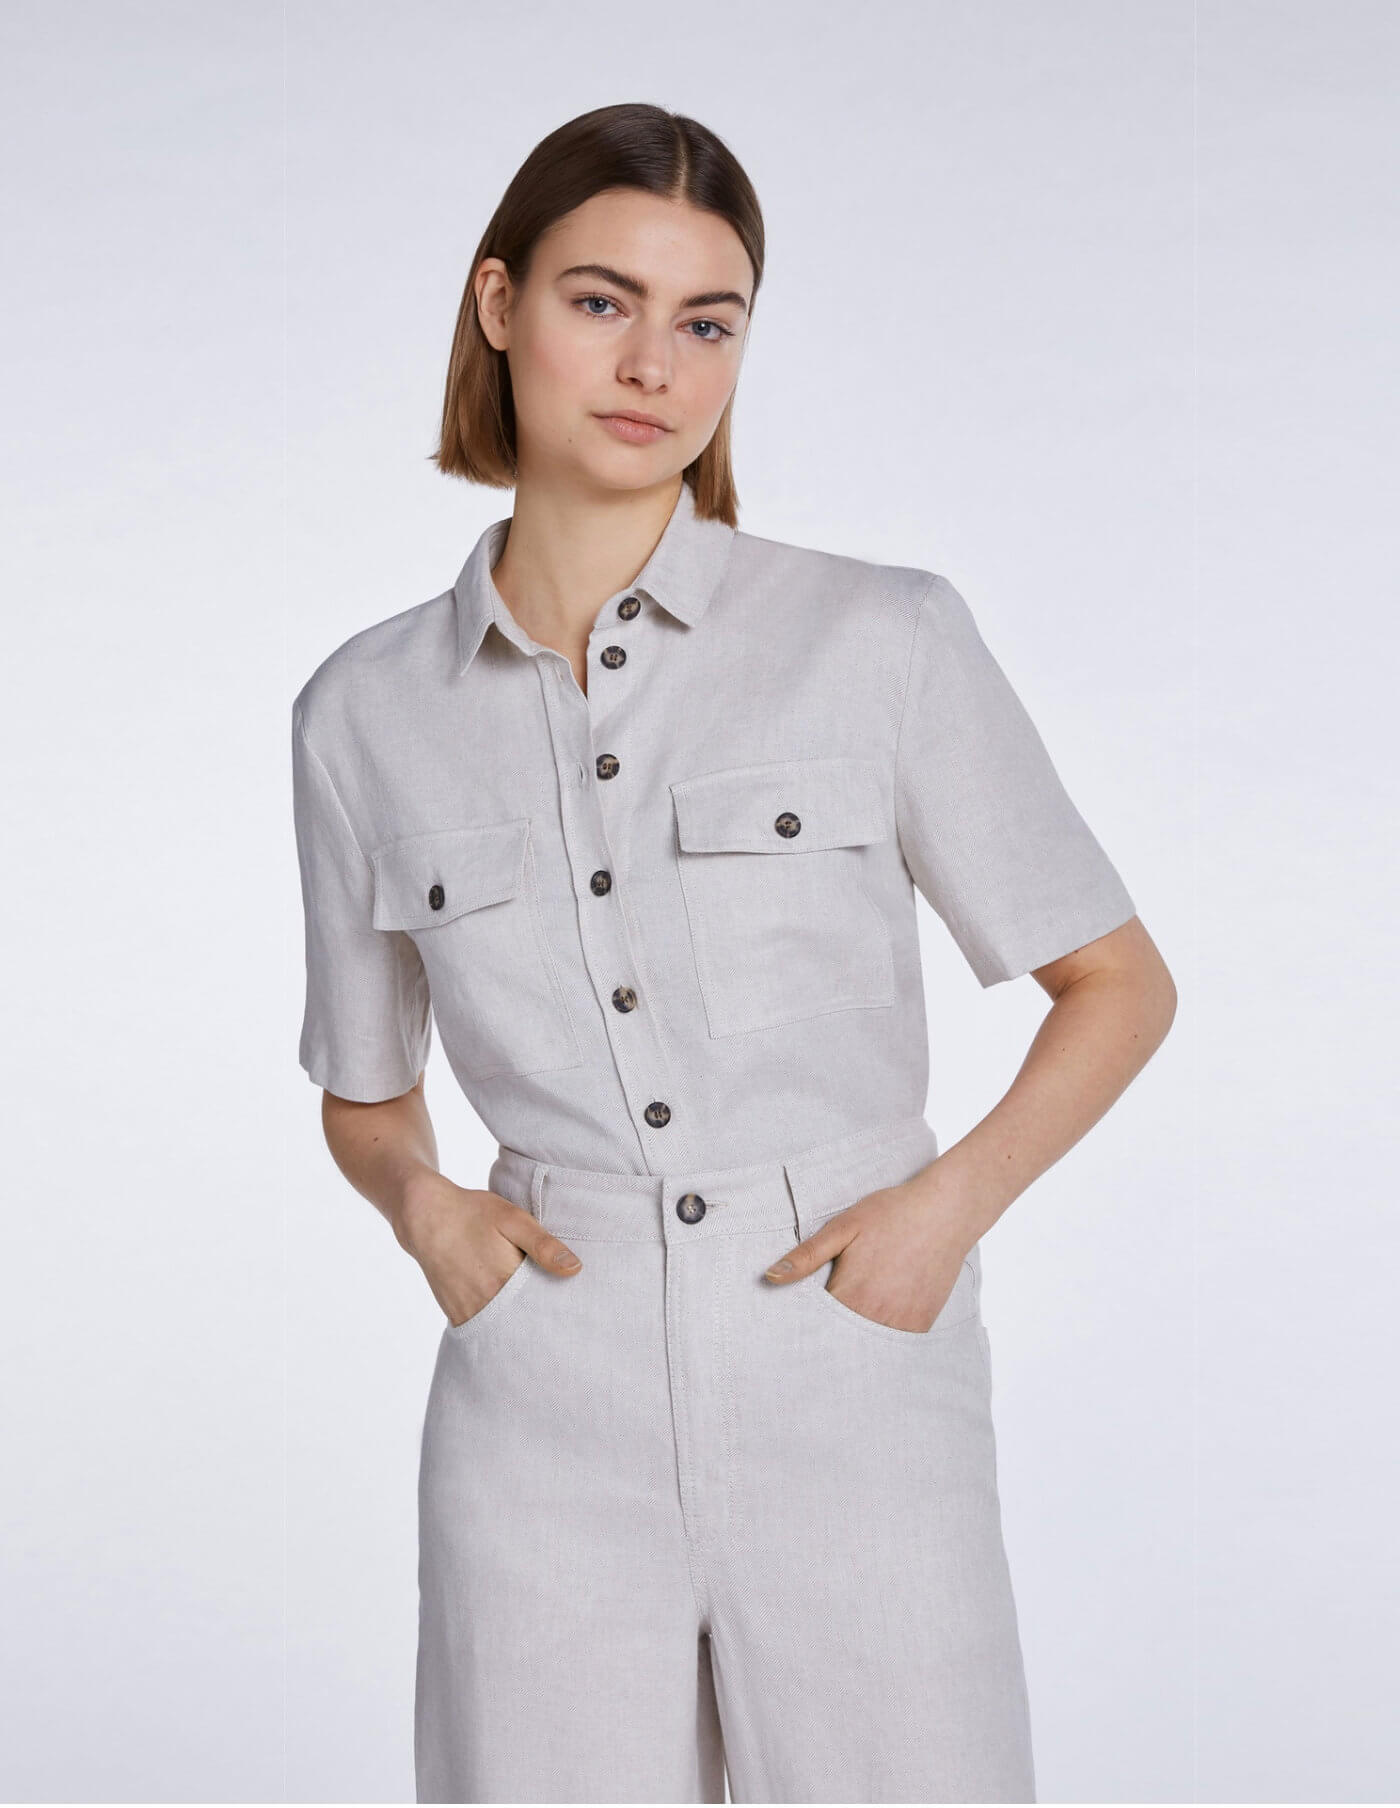 Set Casual Short Sleeve Shirt In Light Stone at Storm Fashion